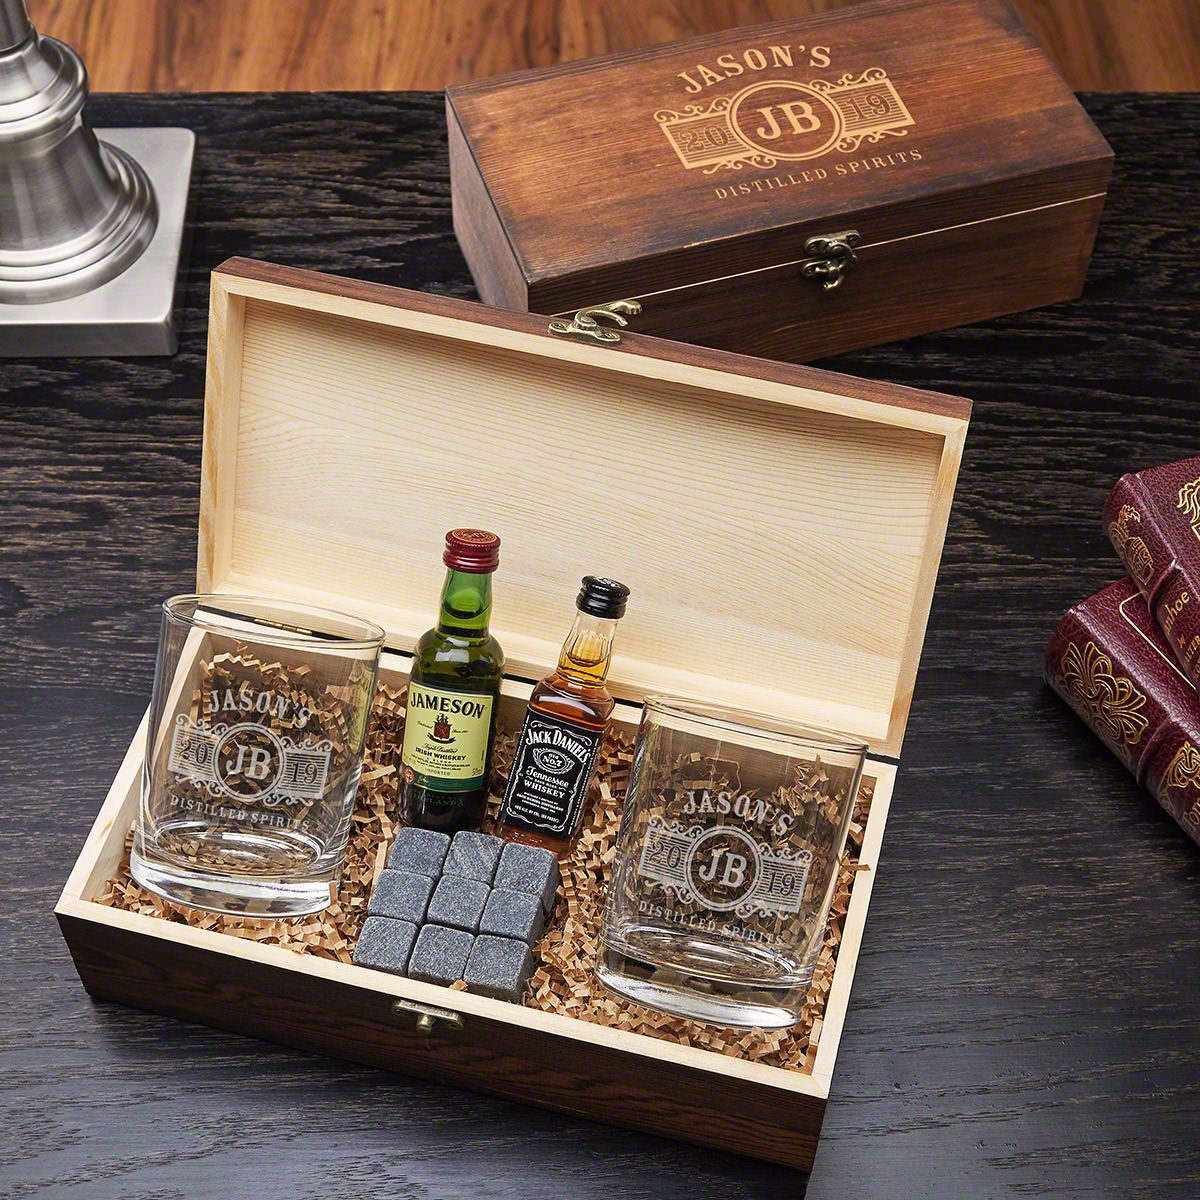 https://images.homewetbar.com/media/catalog/product/7/3/7319-marquee-whiskey-lover-gift-box.jpg?store=default&image-type=image